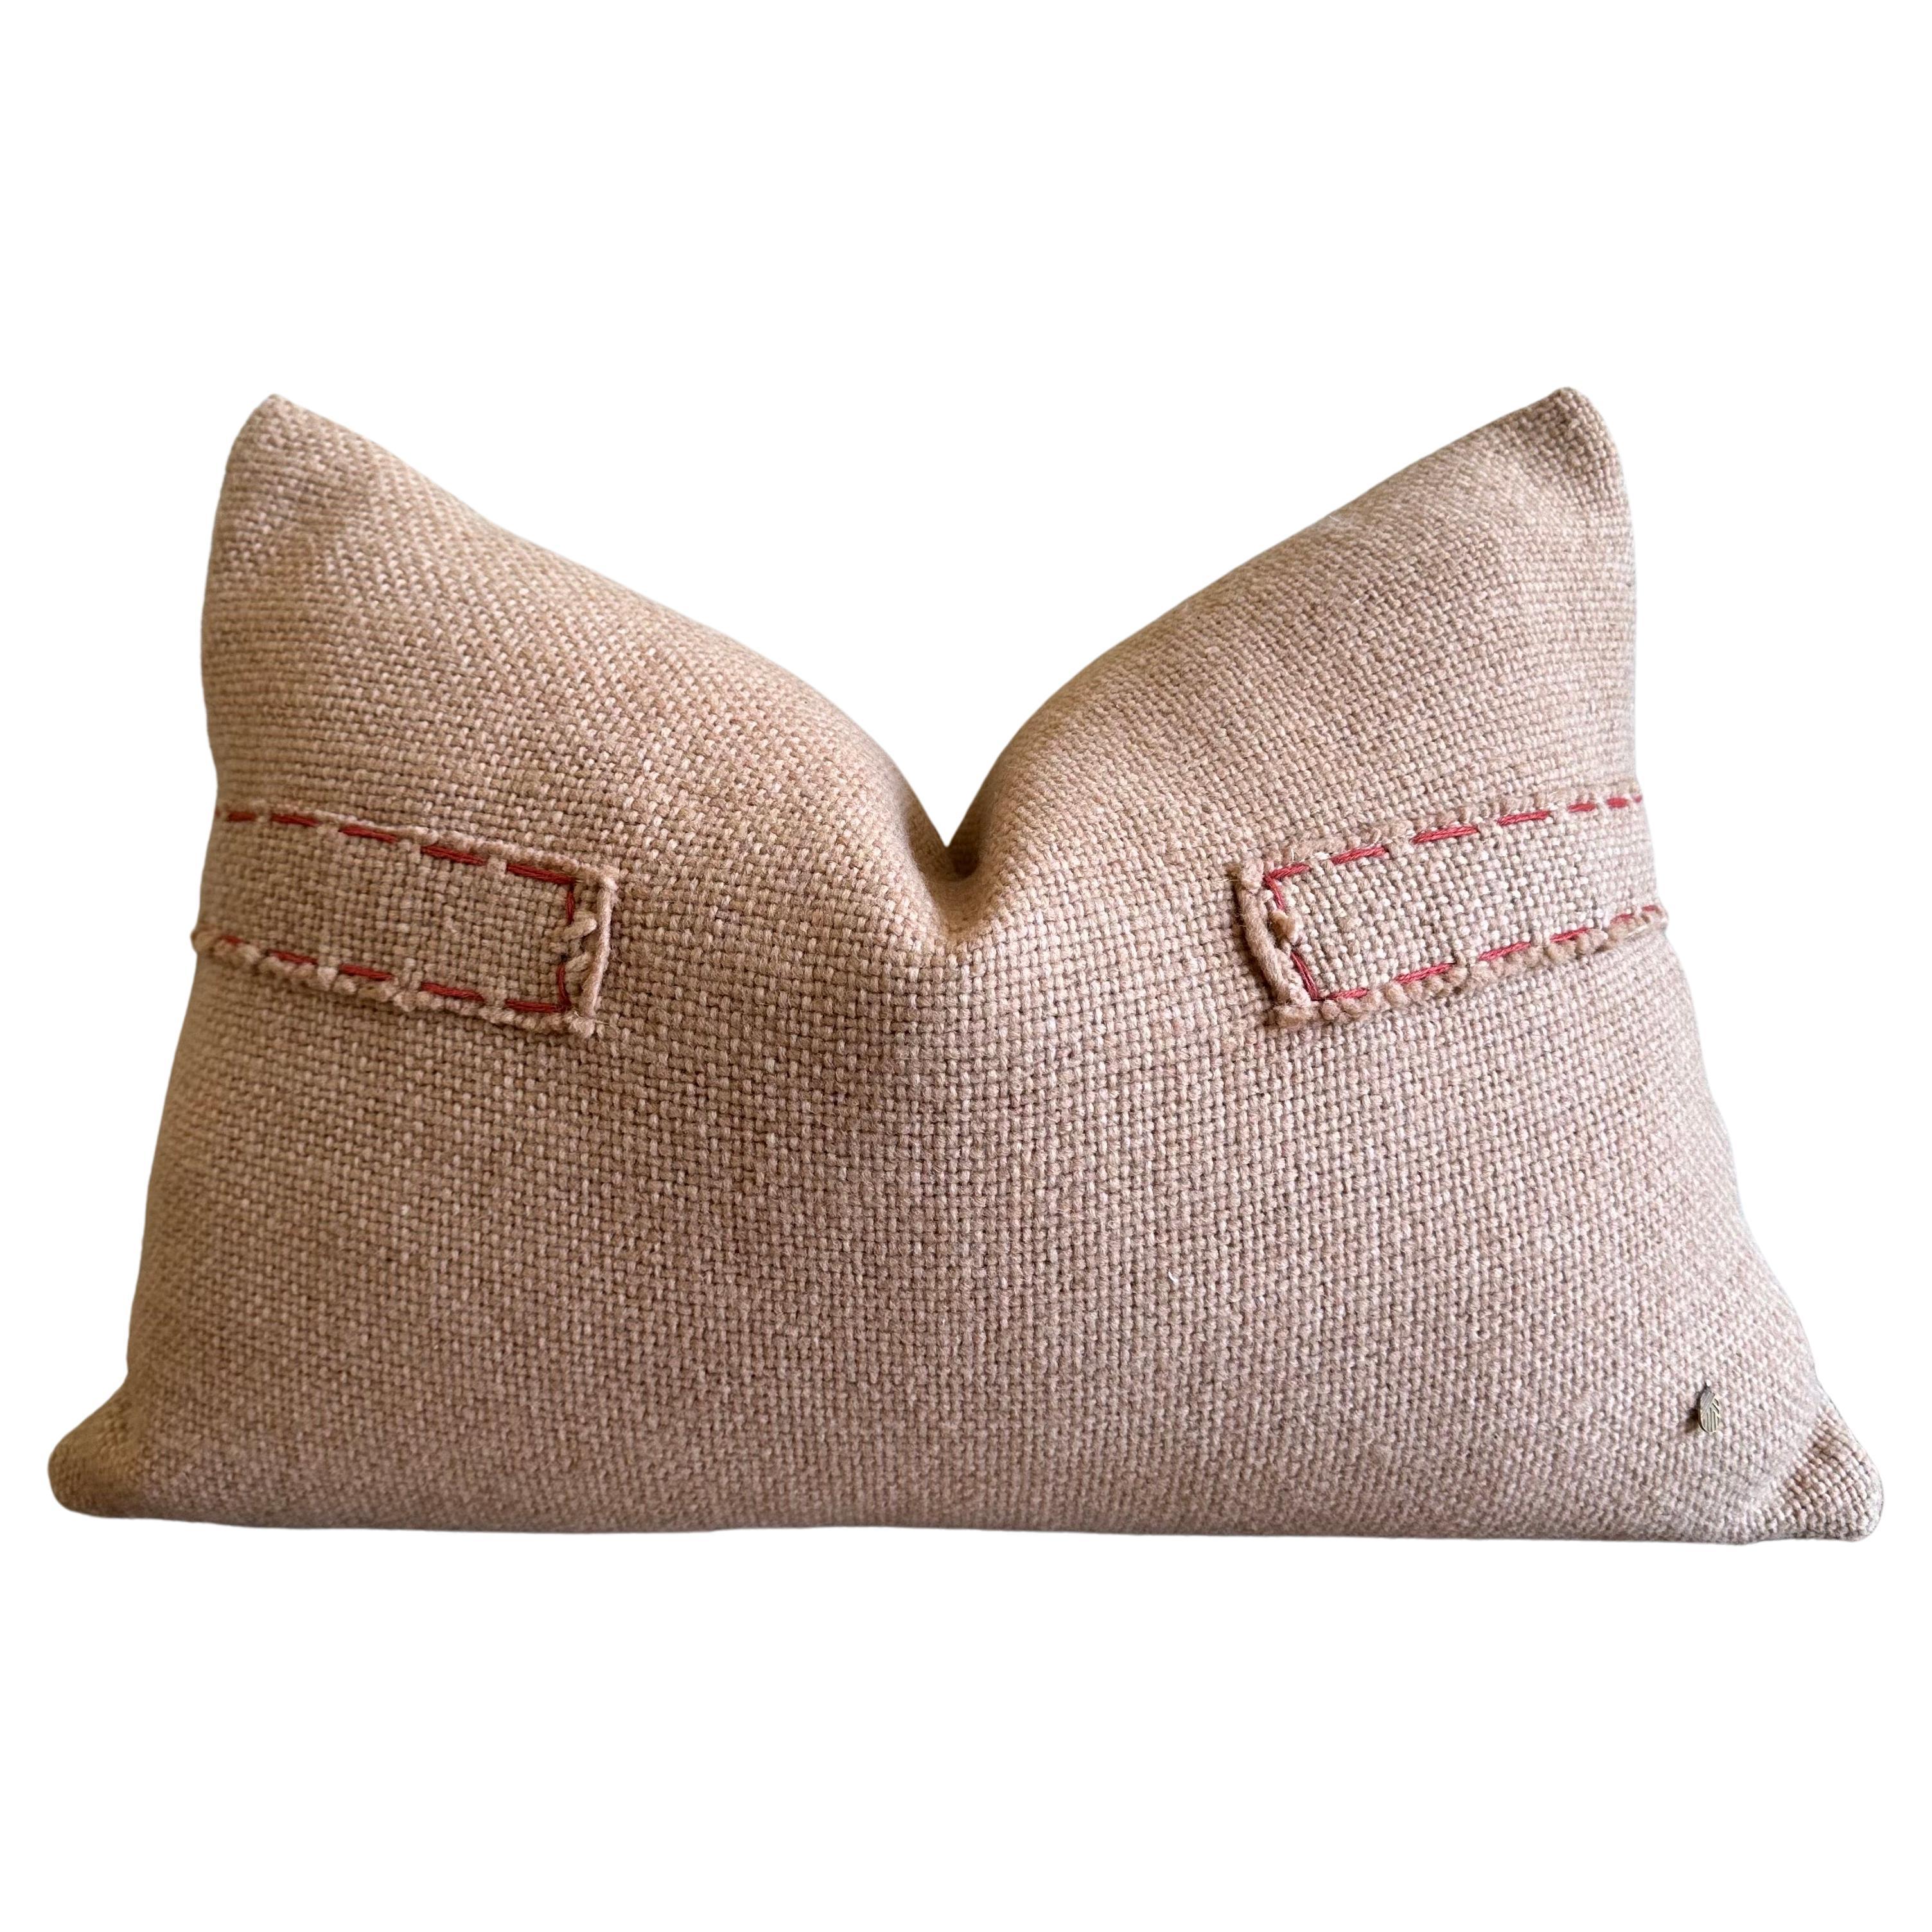 Custom Hand Stitched Wool Patchwork Pillow in Blush Wool For Sale